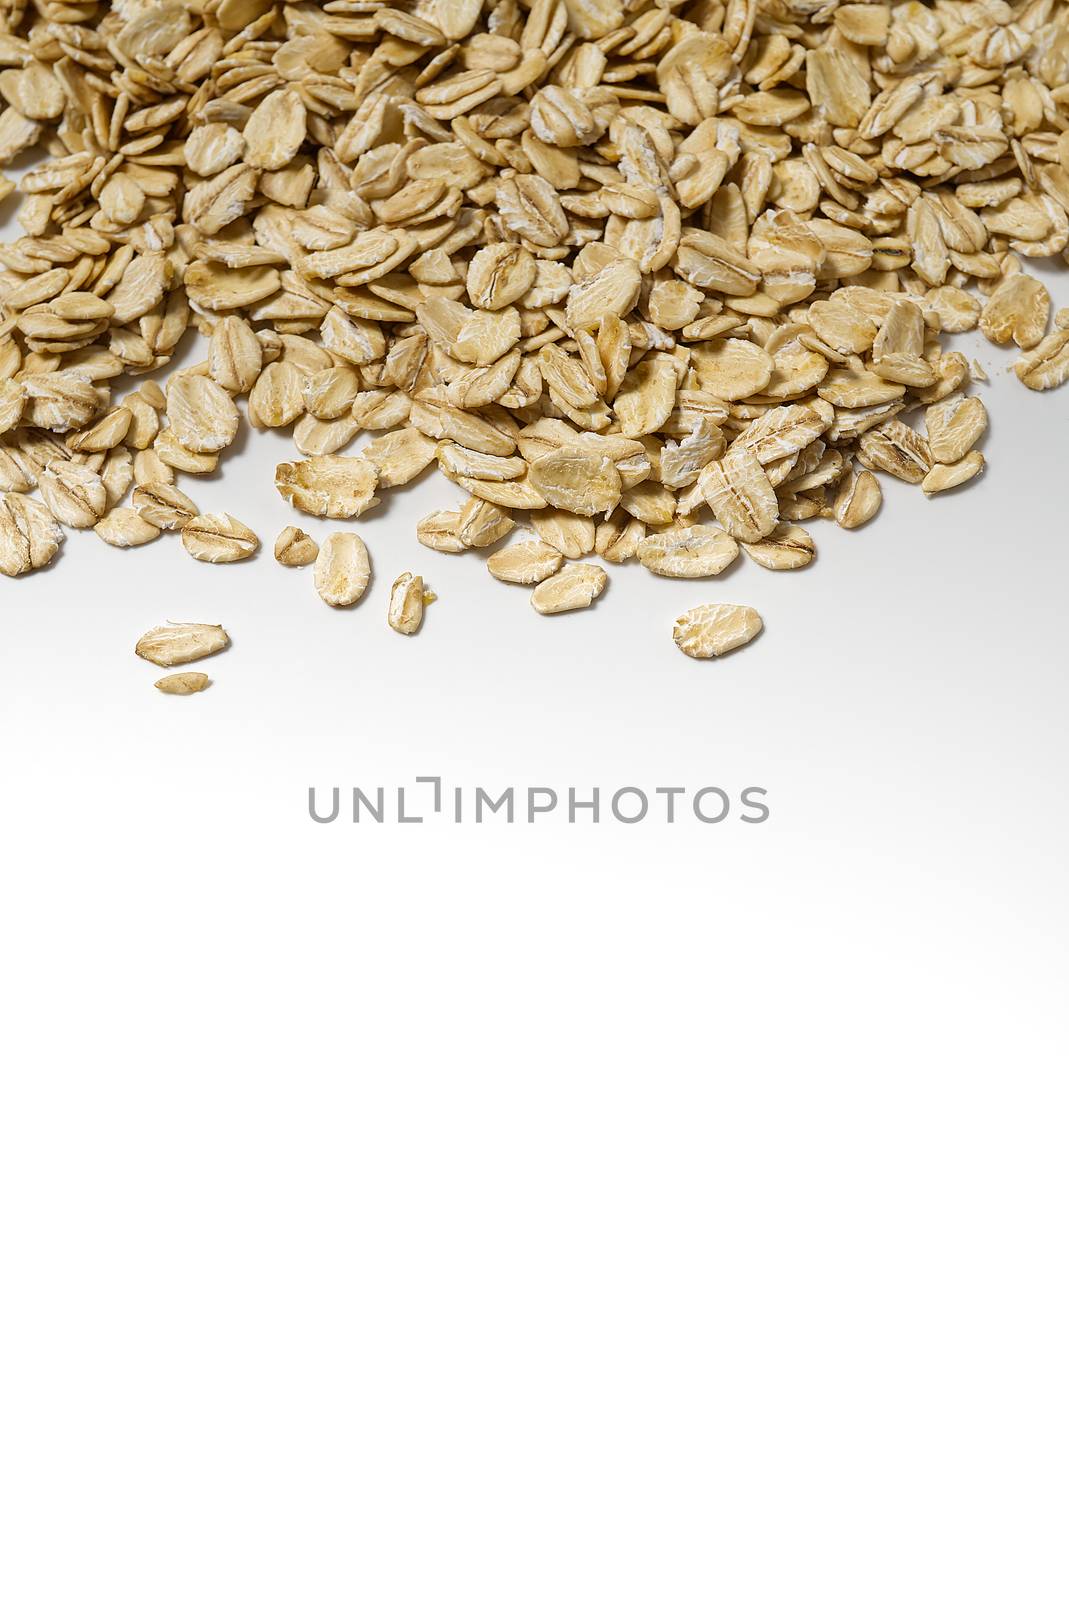 the organic healthy raw oat flakes on white background with copy space border. by PhotoTime